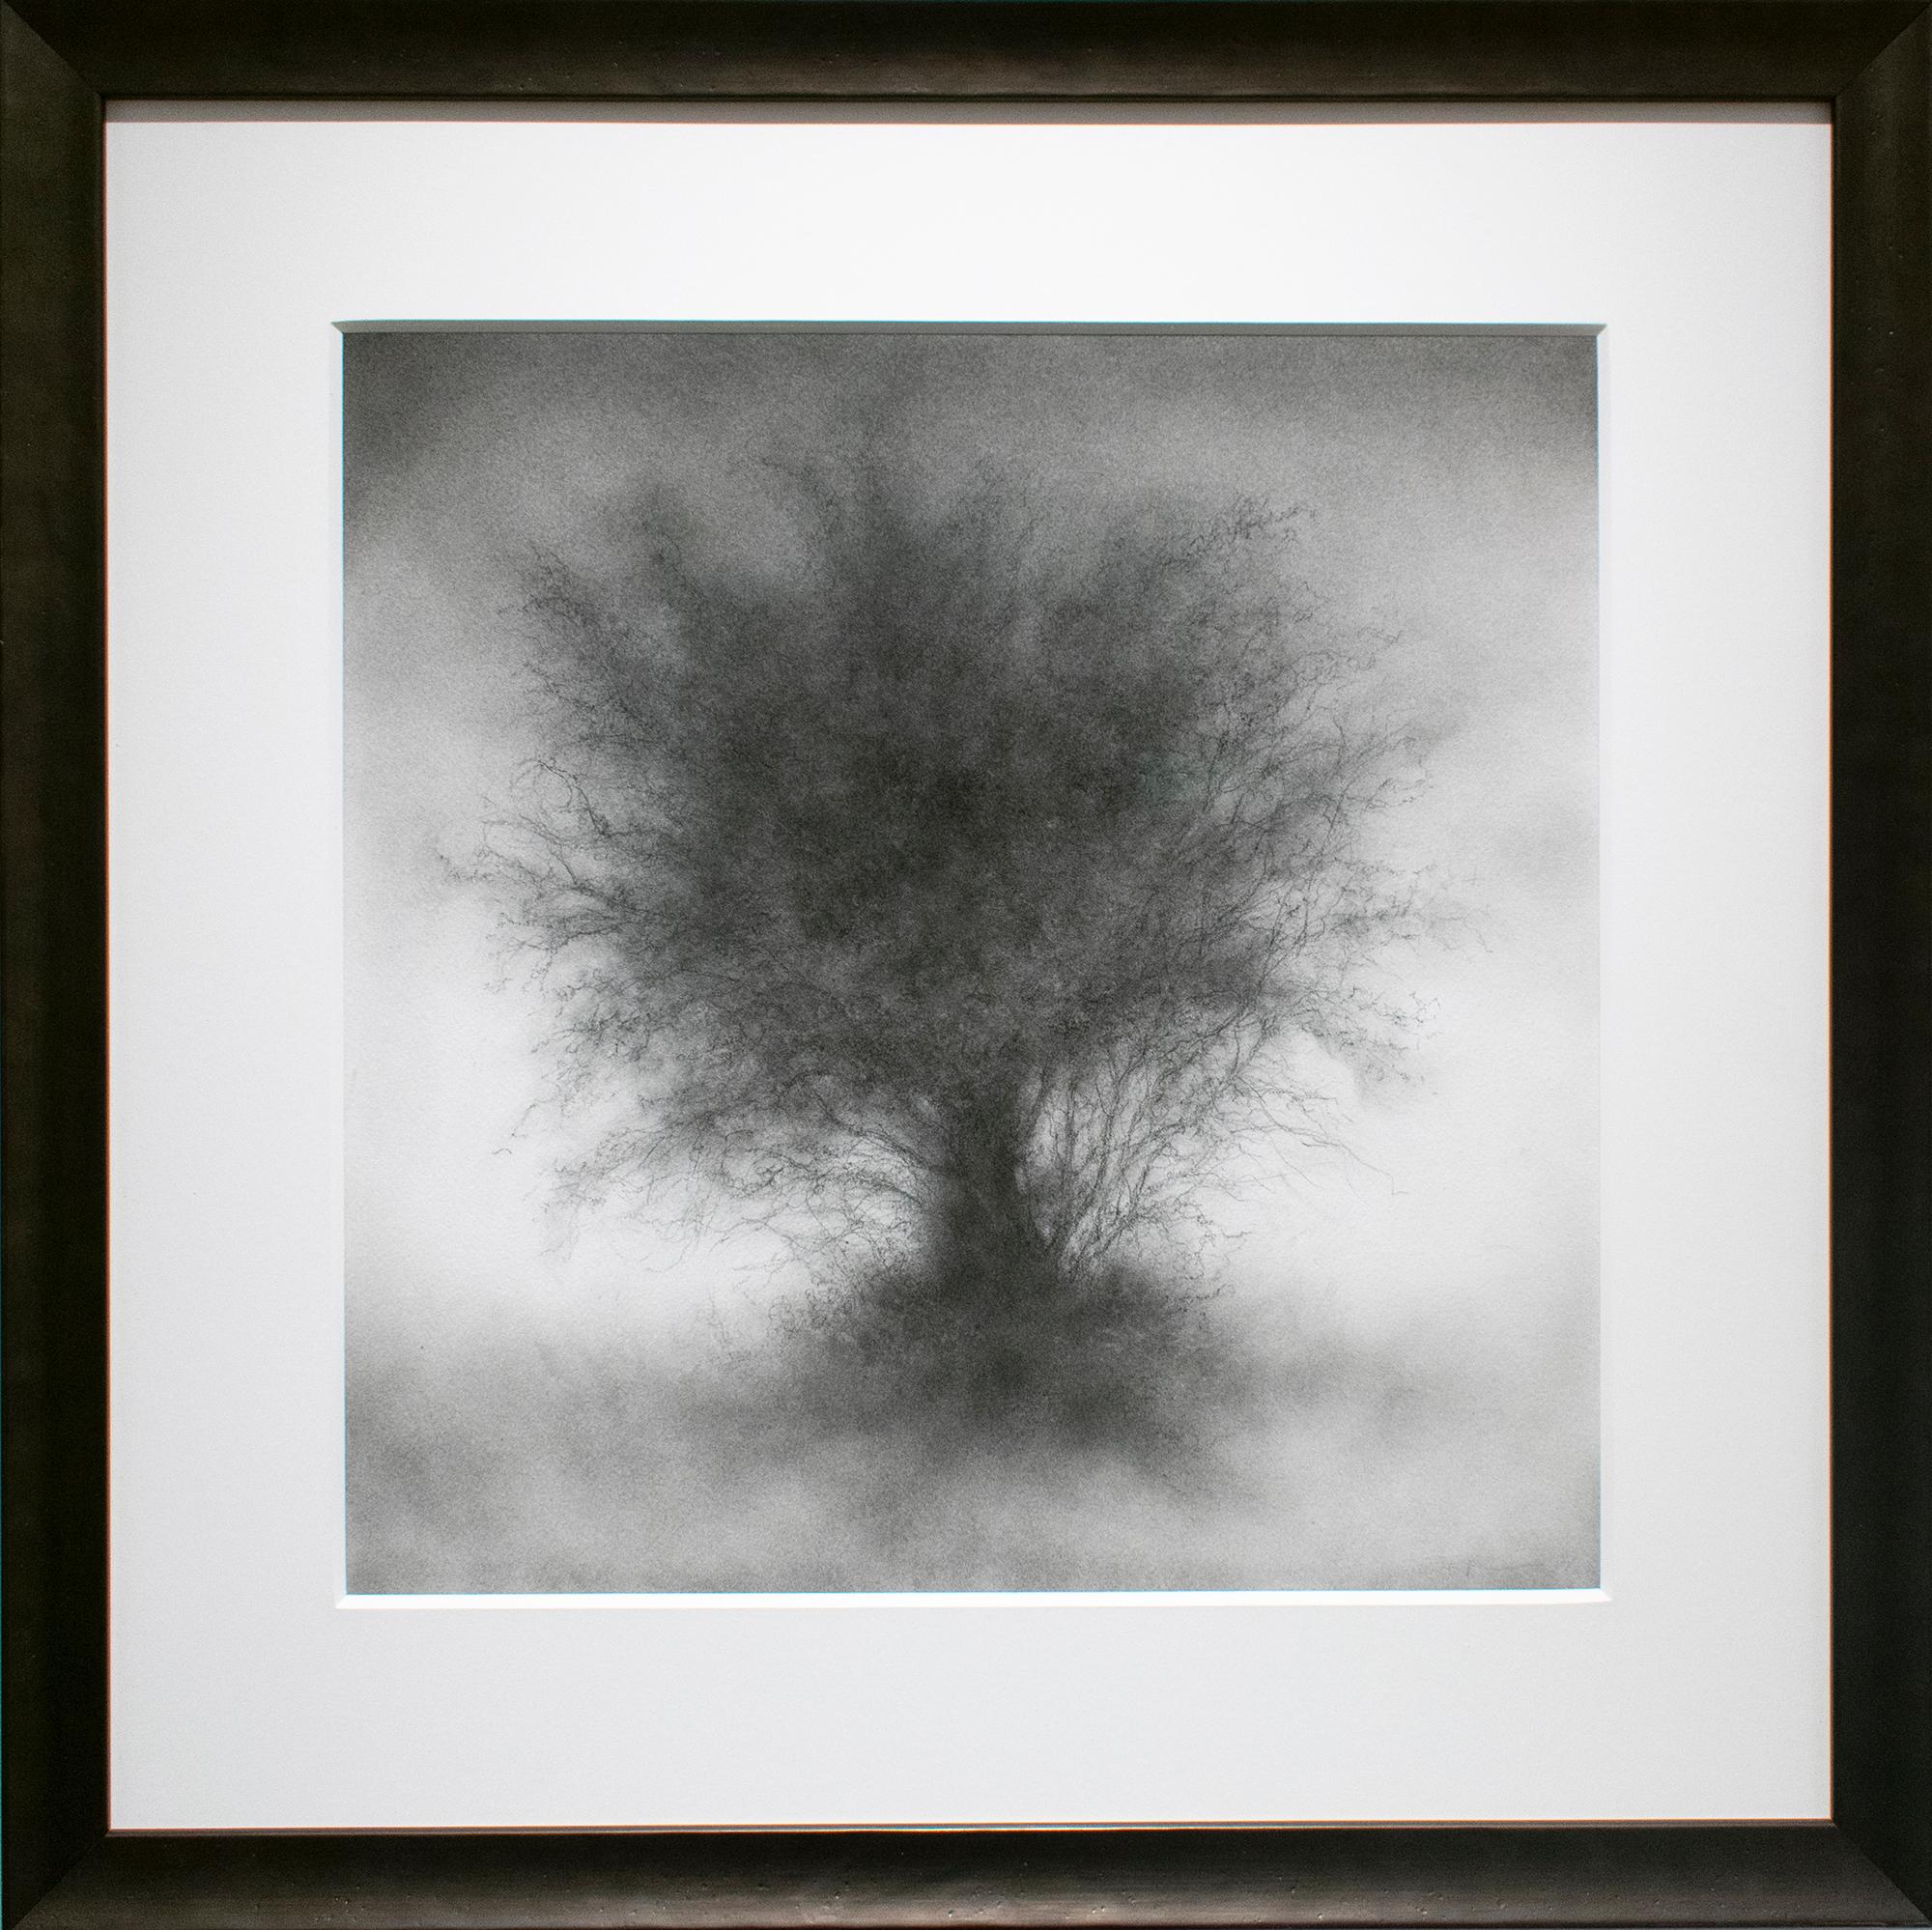 Whippersnapper (Realistic Charcoal Landscape Drawing on Panel of a Large Tree) - Art by Sue Bryan